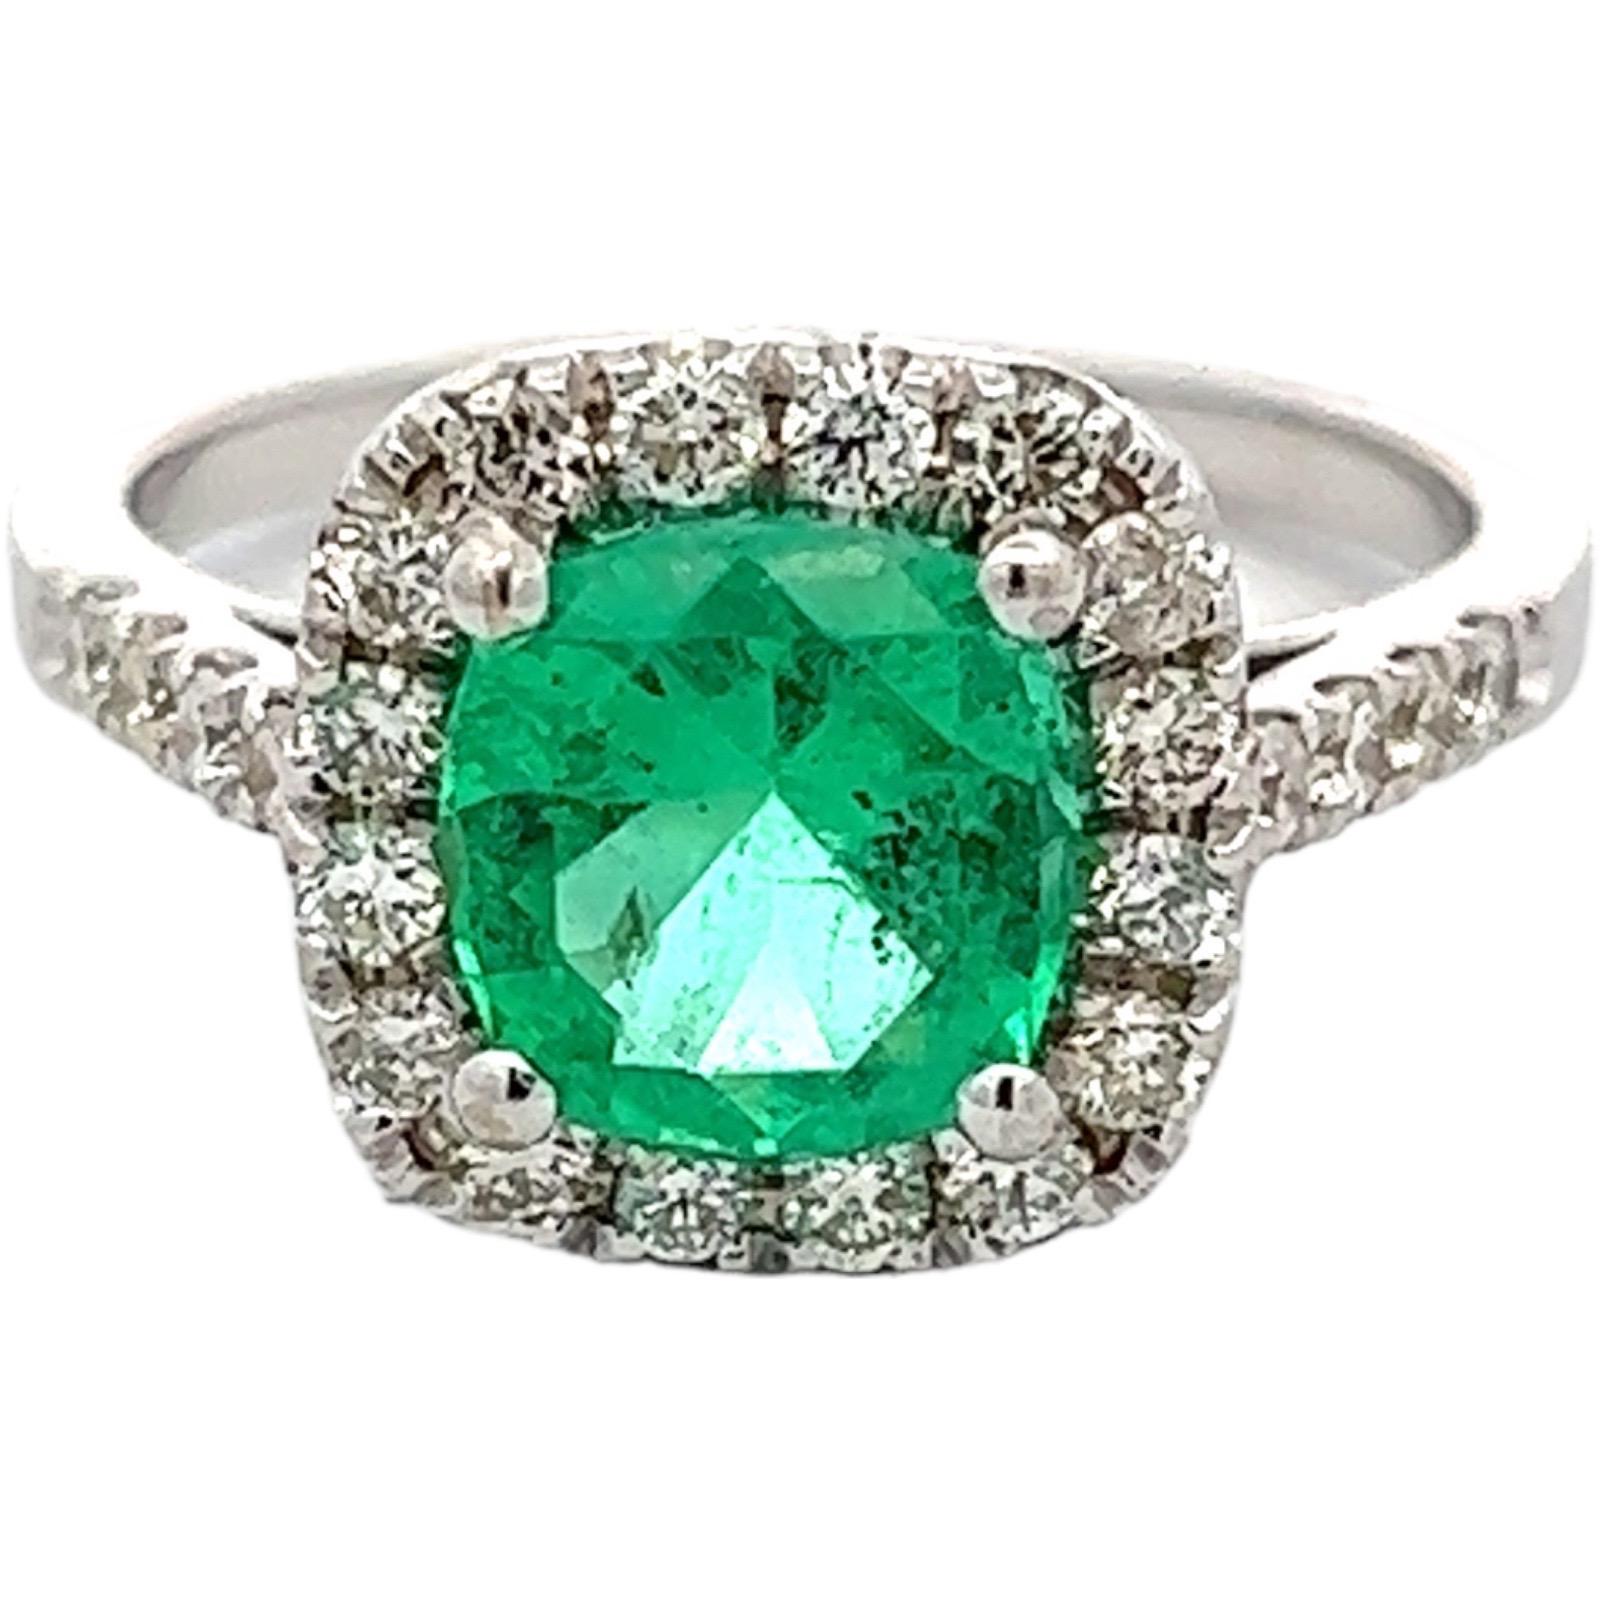 Beautiful green Colombian emerald diamond cocktail ring fashioned in 18 karat white gold. The 1.59 carat cushion cut Colombian emerald is GIA certified for origin and F1 minor clarity enhancement. The emerald is set in a halo mounting featuring